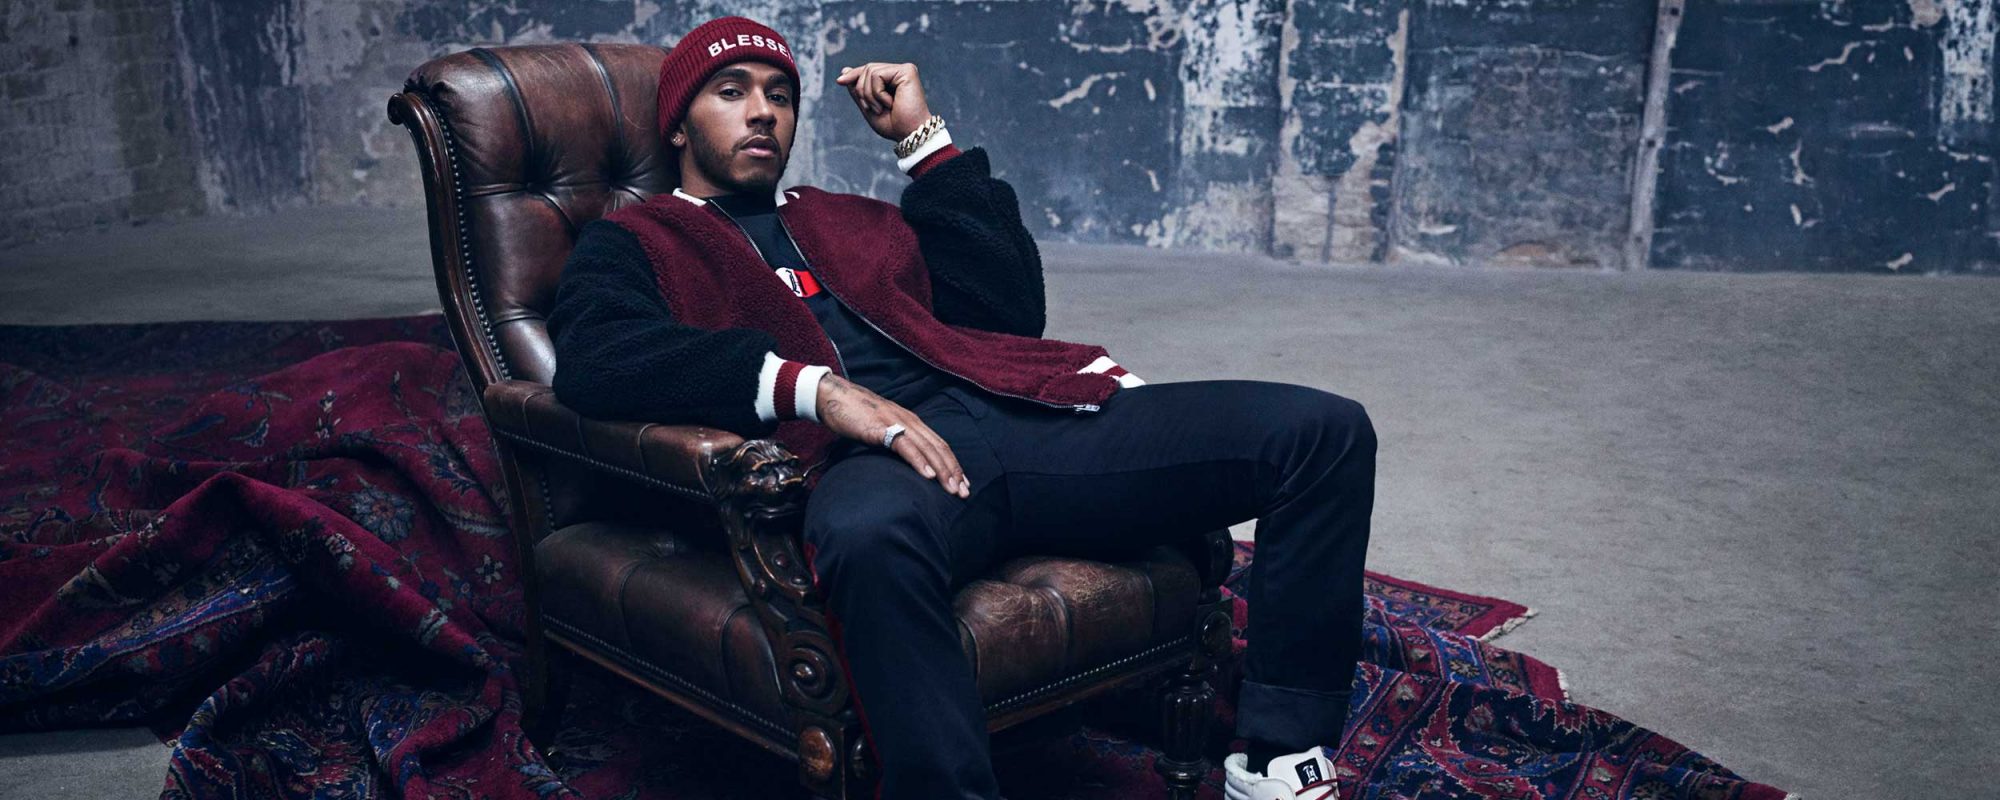 Tommy Hilfiger Lewis Hamilton in chair